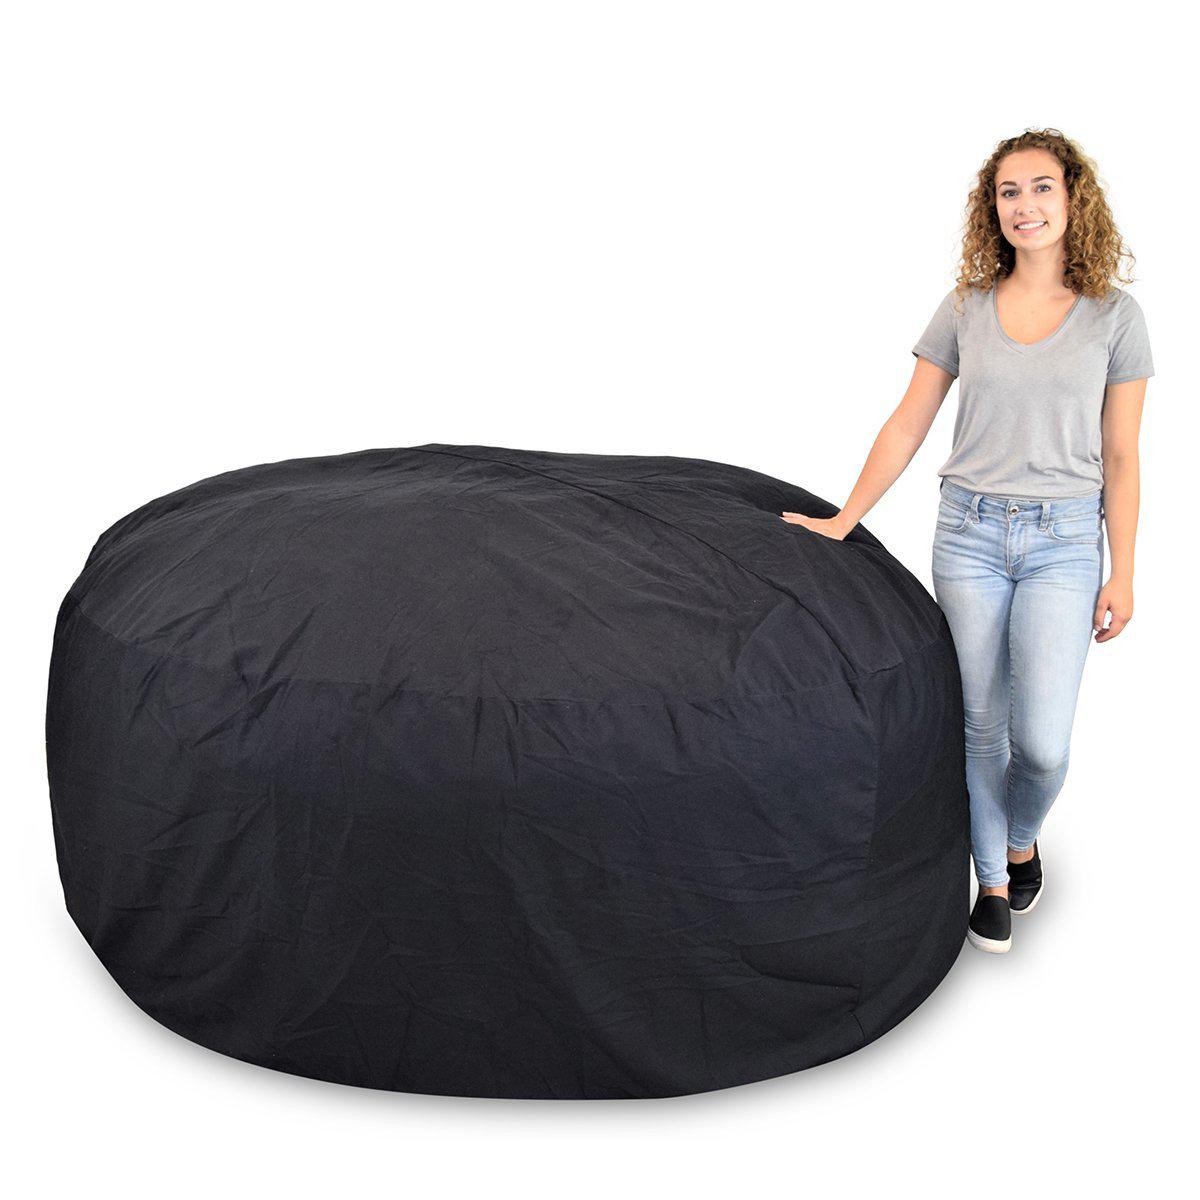 Amazon.com: Flash Furniture Dillon Small Bean Bag Chair for Kids and Teens,  Foam-Filled Beanbag Chair with Machine Washable Cover, Denim : Home &  Kitchen